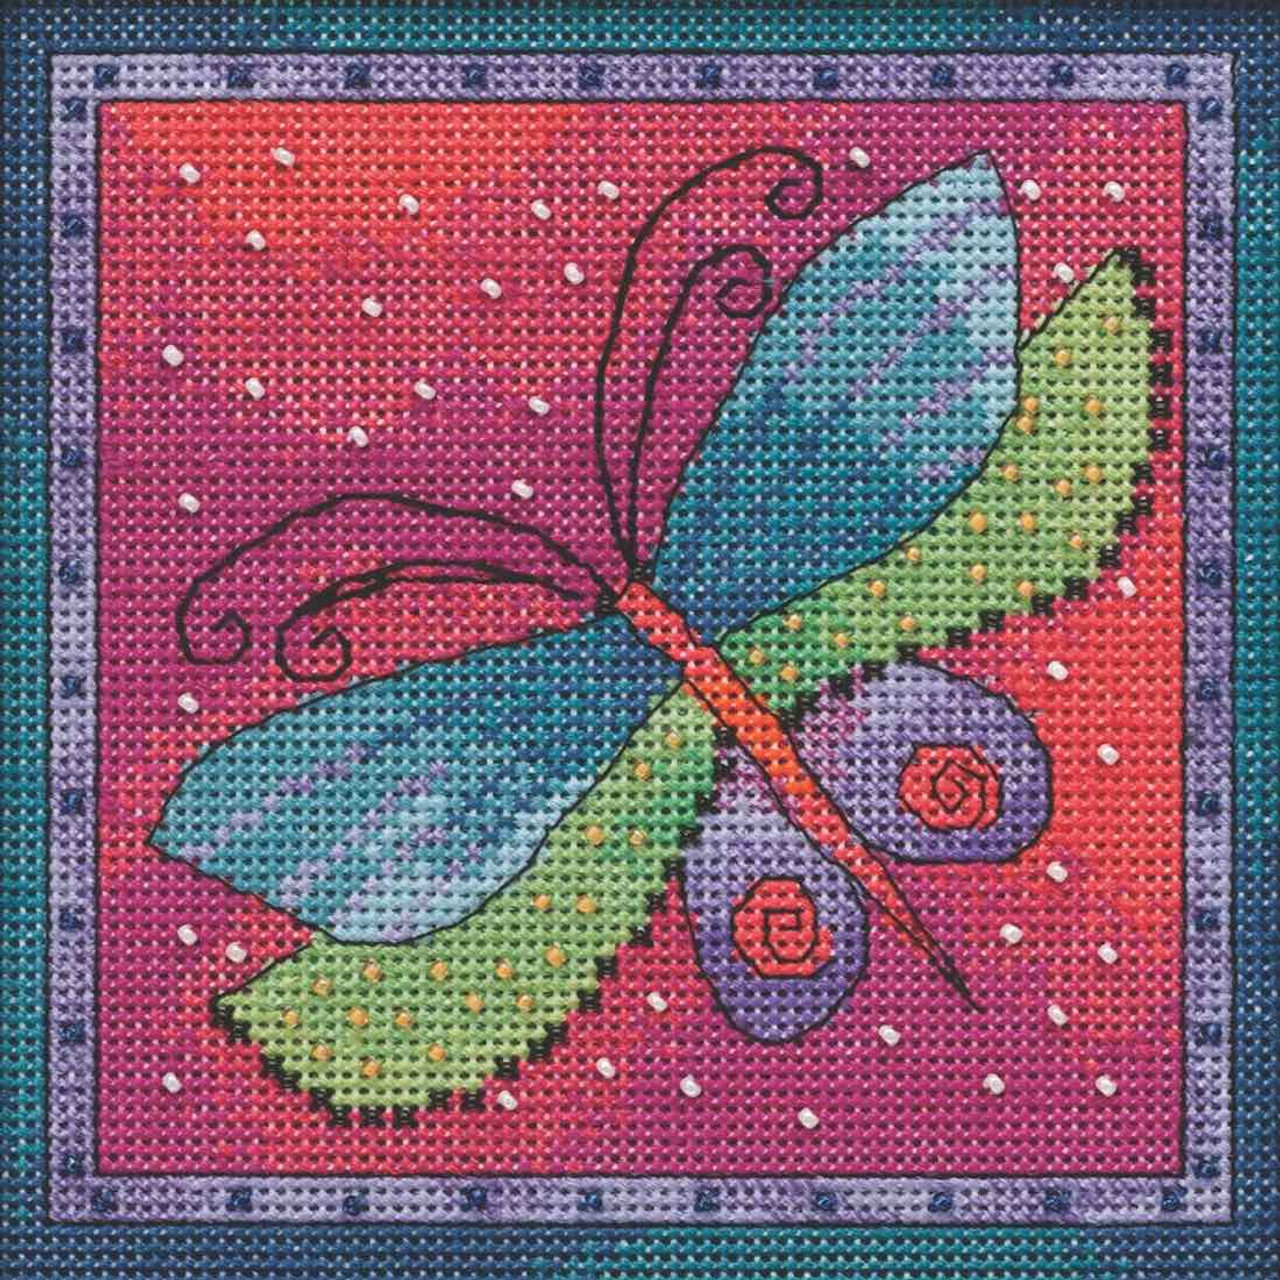 Stitched area of Dragonfly Fuchsia Cross Stitch Kit Mill Hill 2019 Laurel Burch Flying Colors LB141913